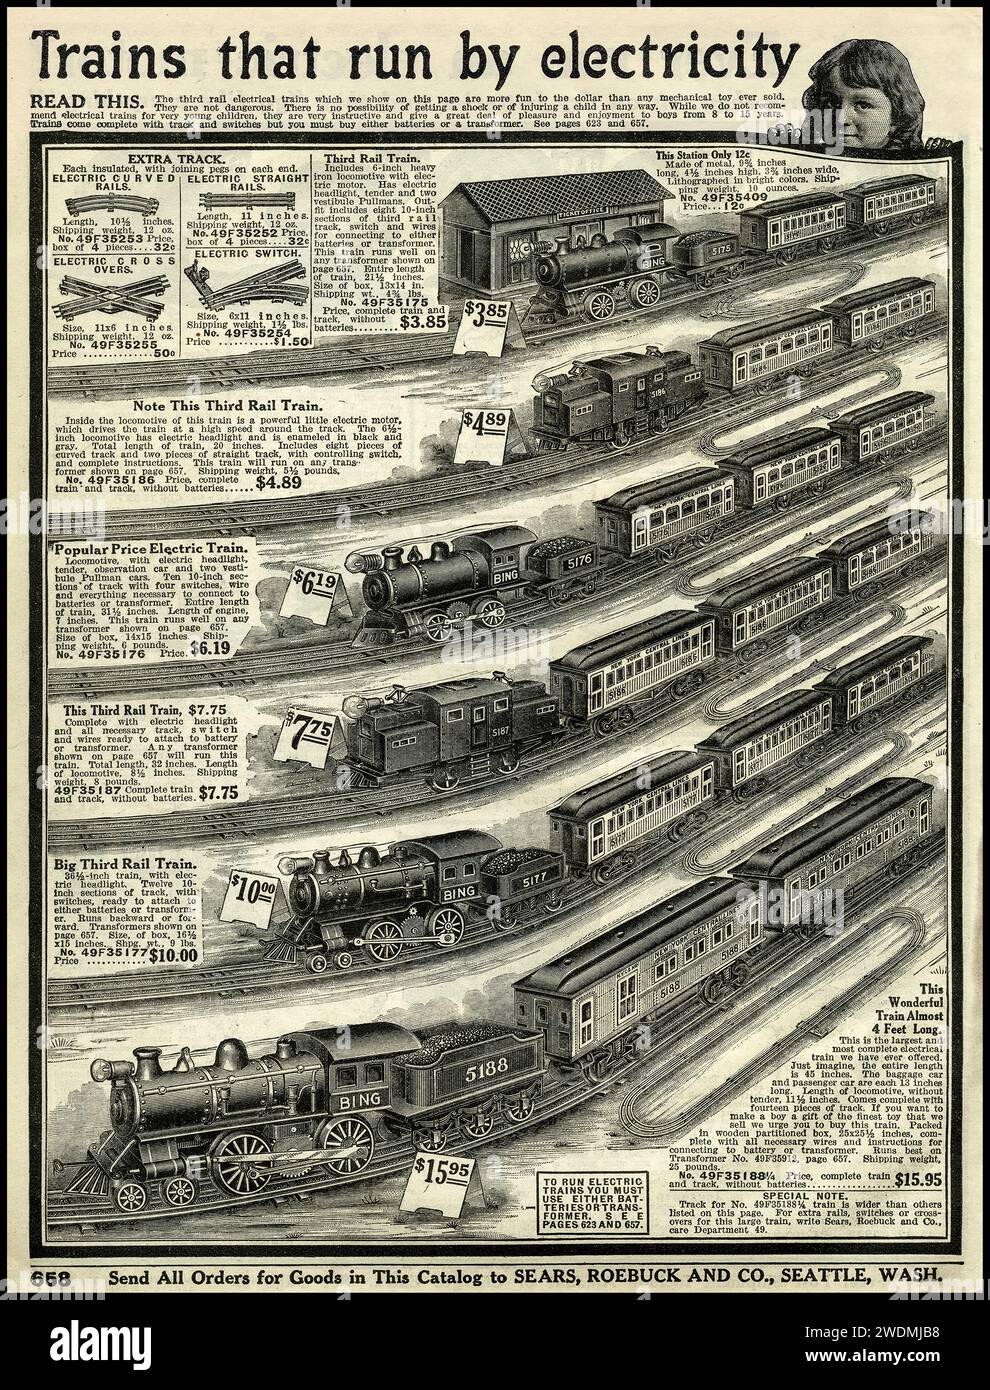 1916 vintage model toy trains railway catalogue page of electric toy trains. Some of these trains were operated by electricity and some had a clockwork motor that was wound with a key. Extra track, a train station and other accessories were also available to purchase. The pages are from a 1916 Sears Roebuck and Co. catalogue. Stock Photo